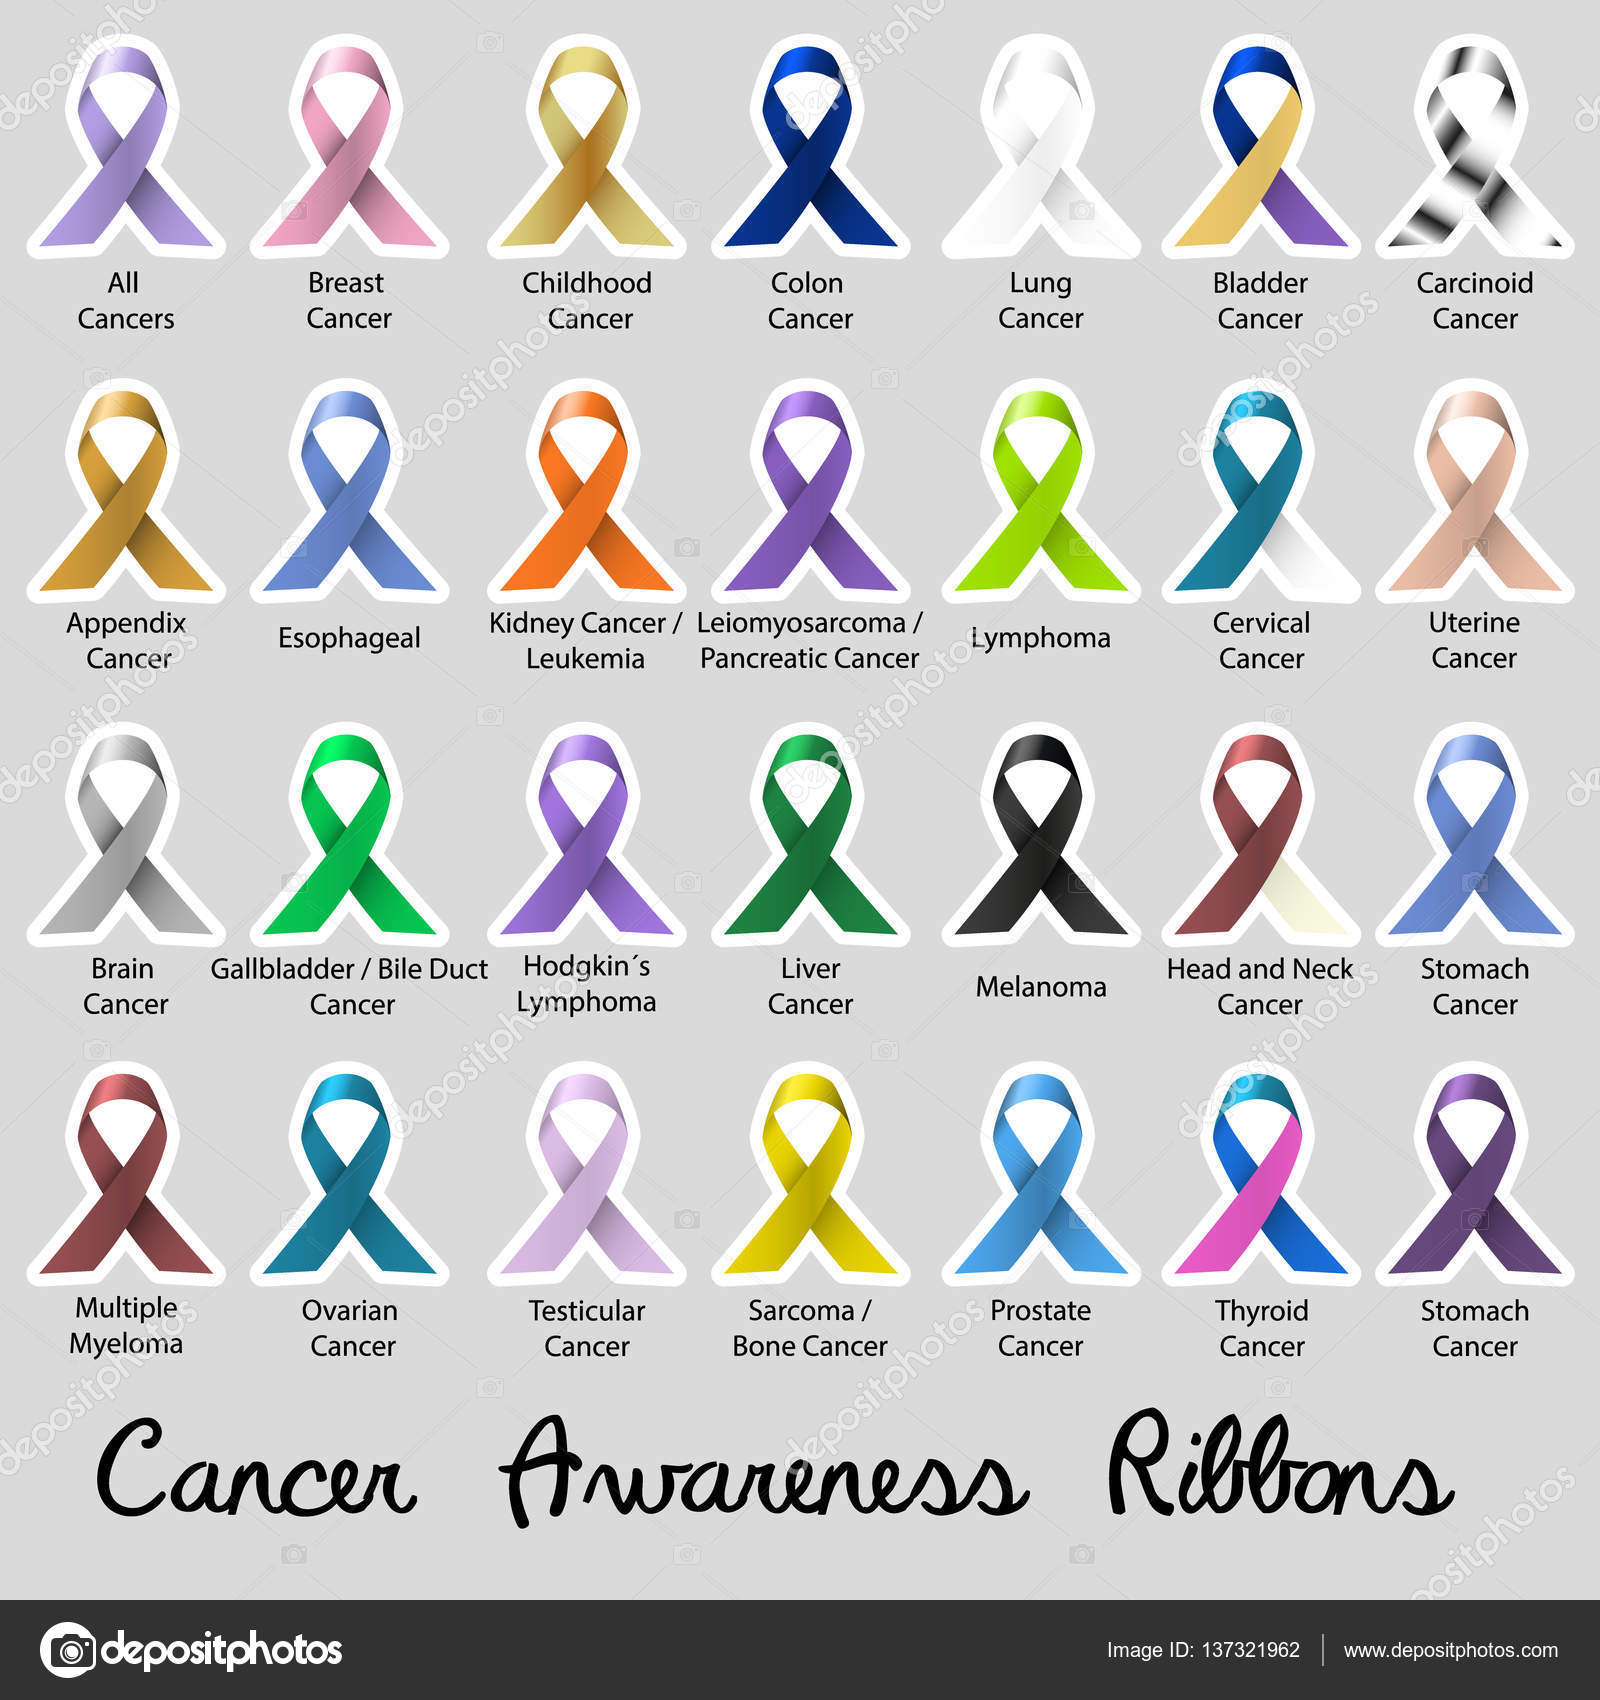 Cancer Awareness Various Color And Shiny Ribbons For Help Stickers Eps10 Vector Image By C Martin951 Vector Stock 137321962